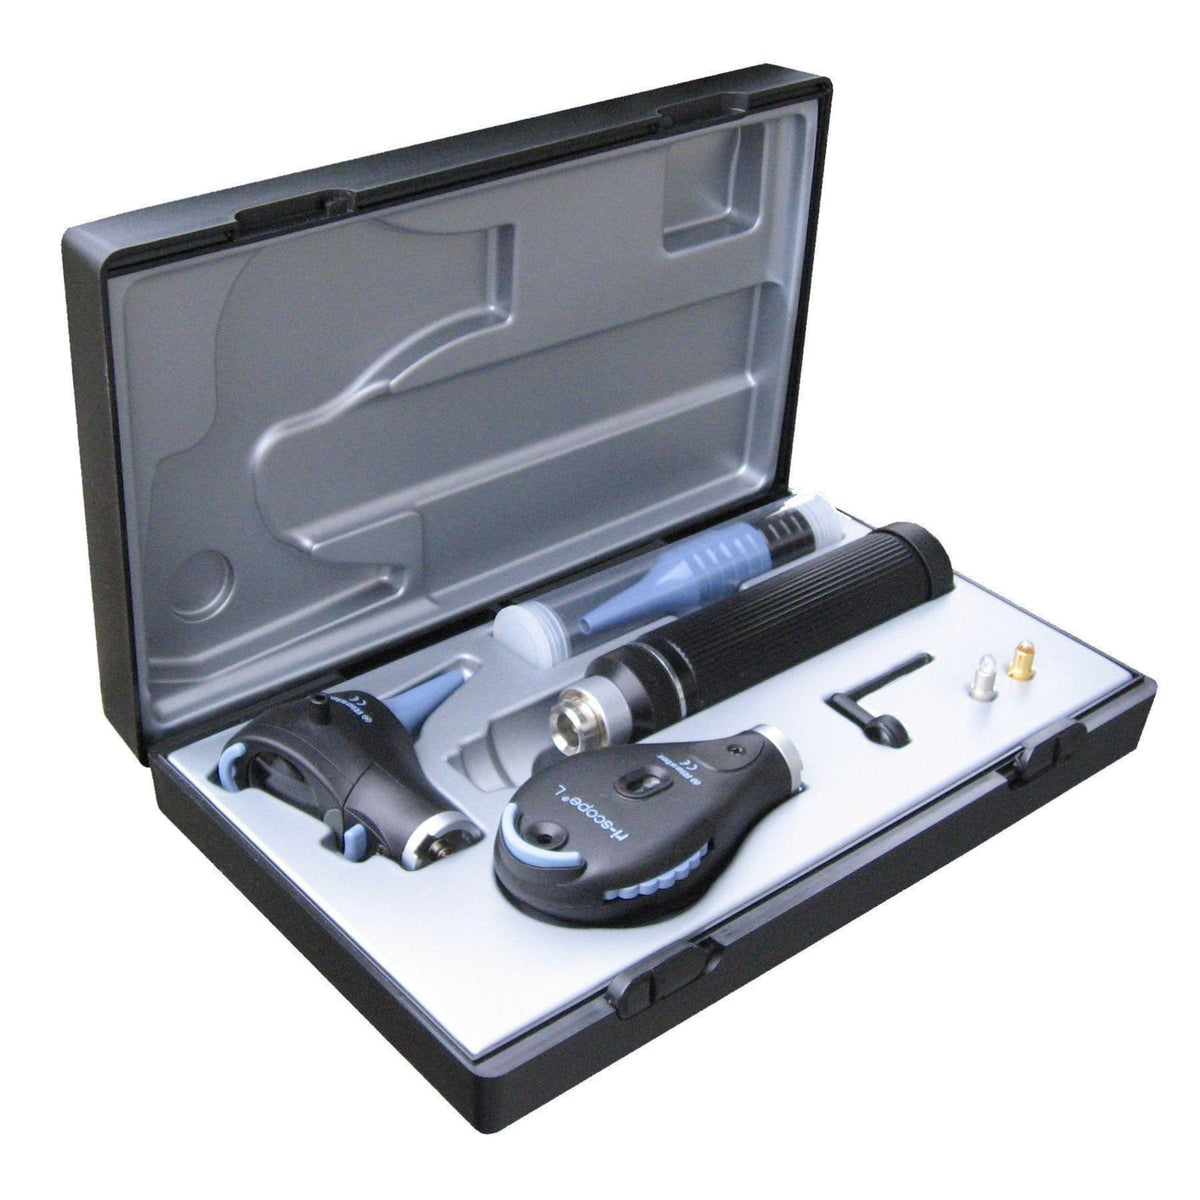 Riester Ri-Scope L Otoscope / Ophthalmoscope L1 XL 3.5 V C Handle for 2 Lithium-Batteries